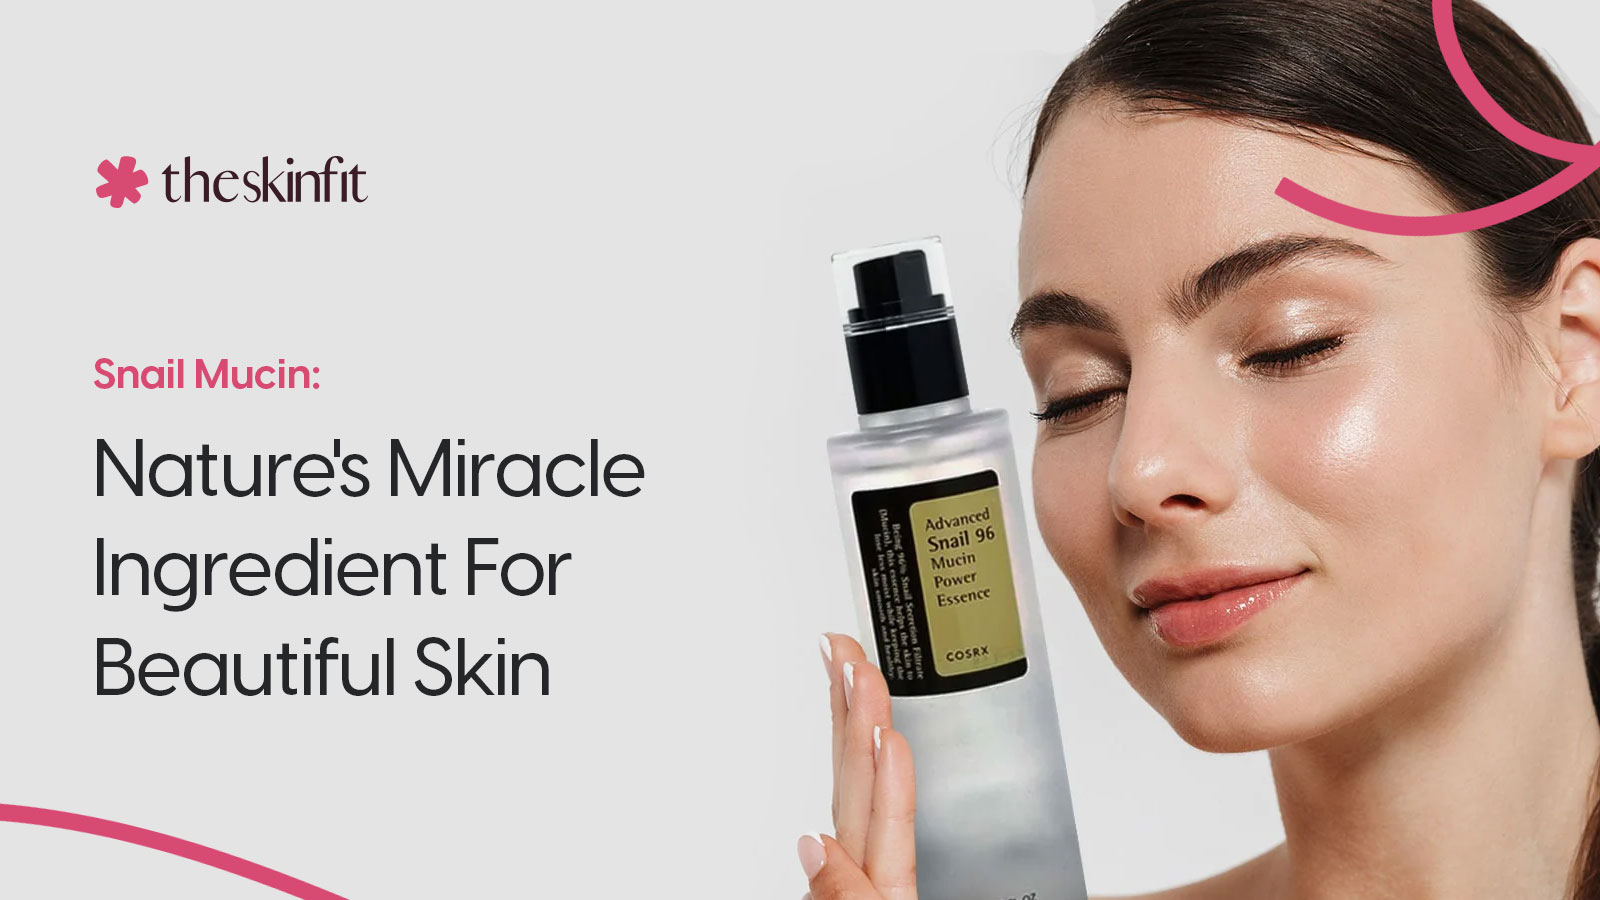 Snail Mucin: Nature's Miracle Ingredient For Beautiful Skin